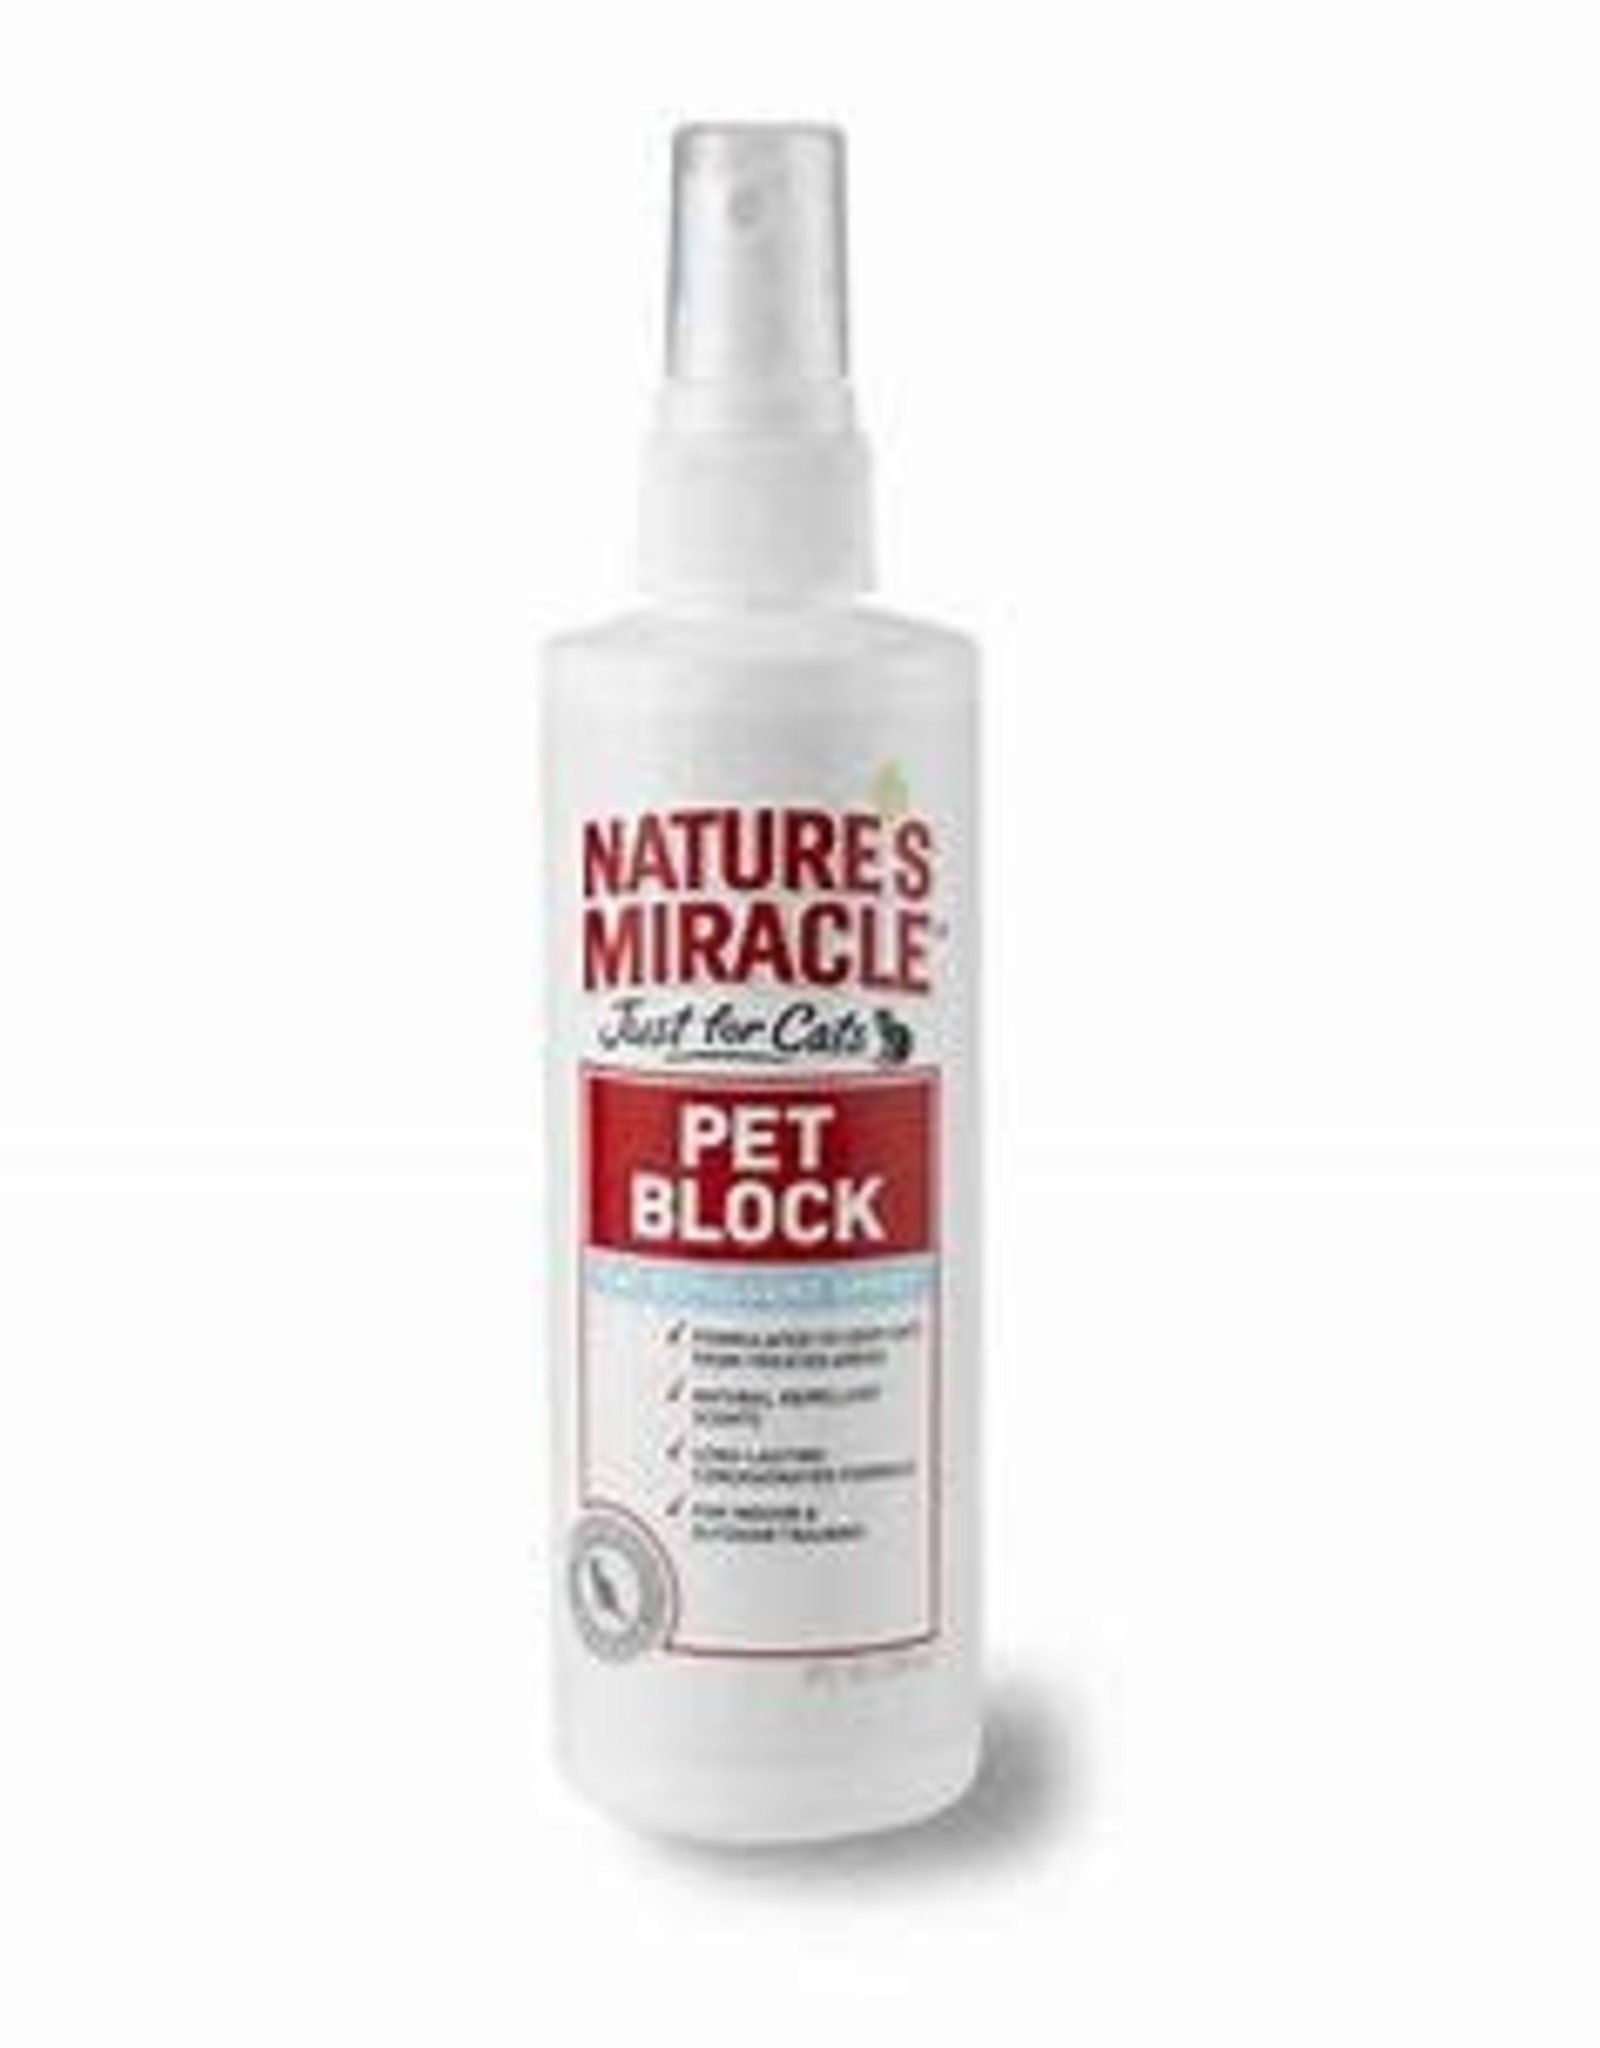 Nature's Miracle Nature's Miracle Cat Pet Block Repellent Spray 8 oz